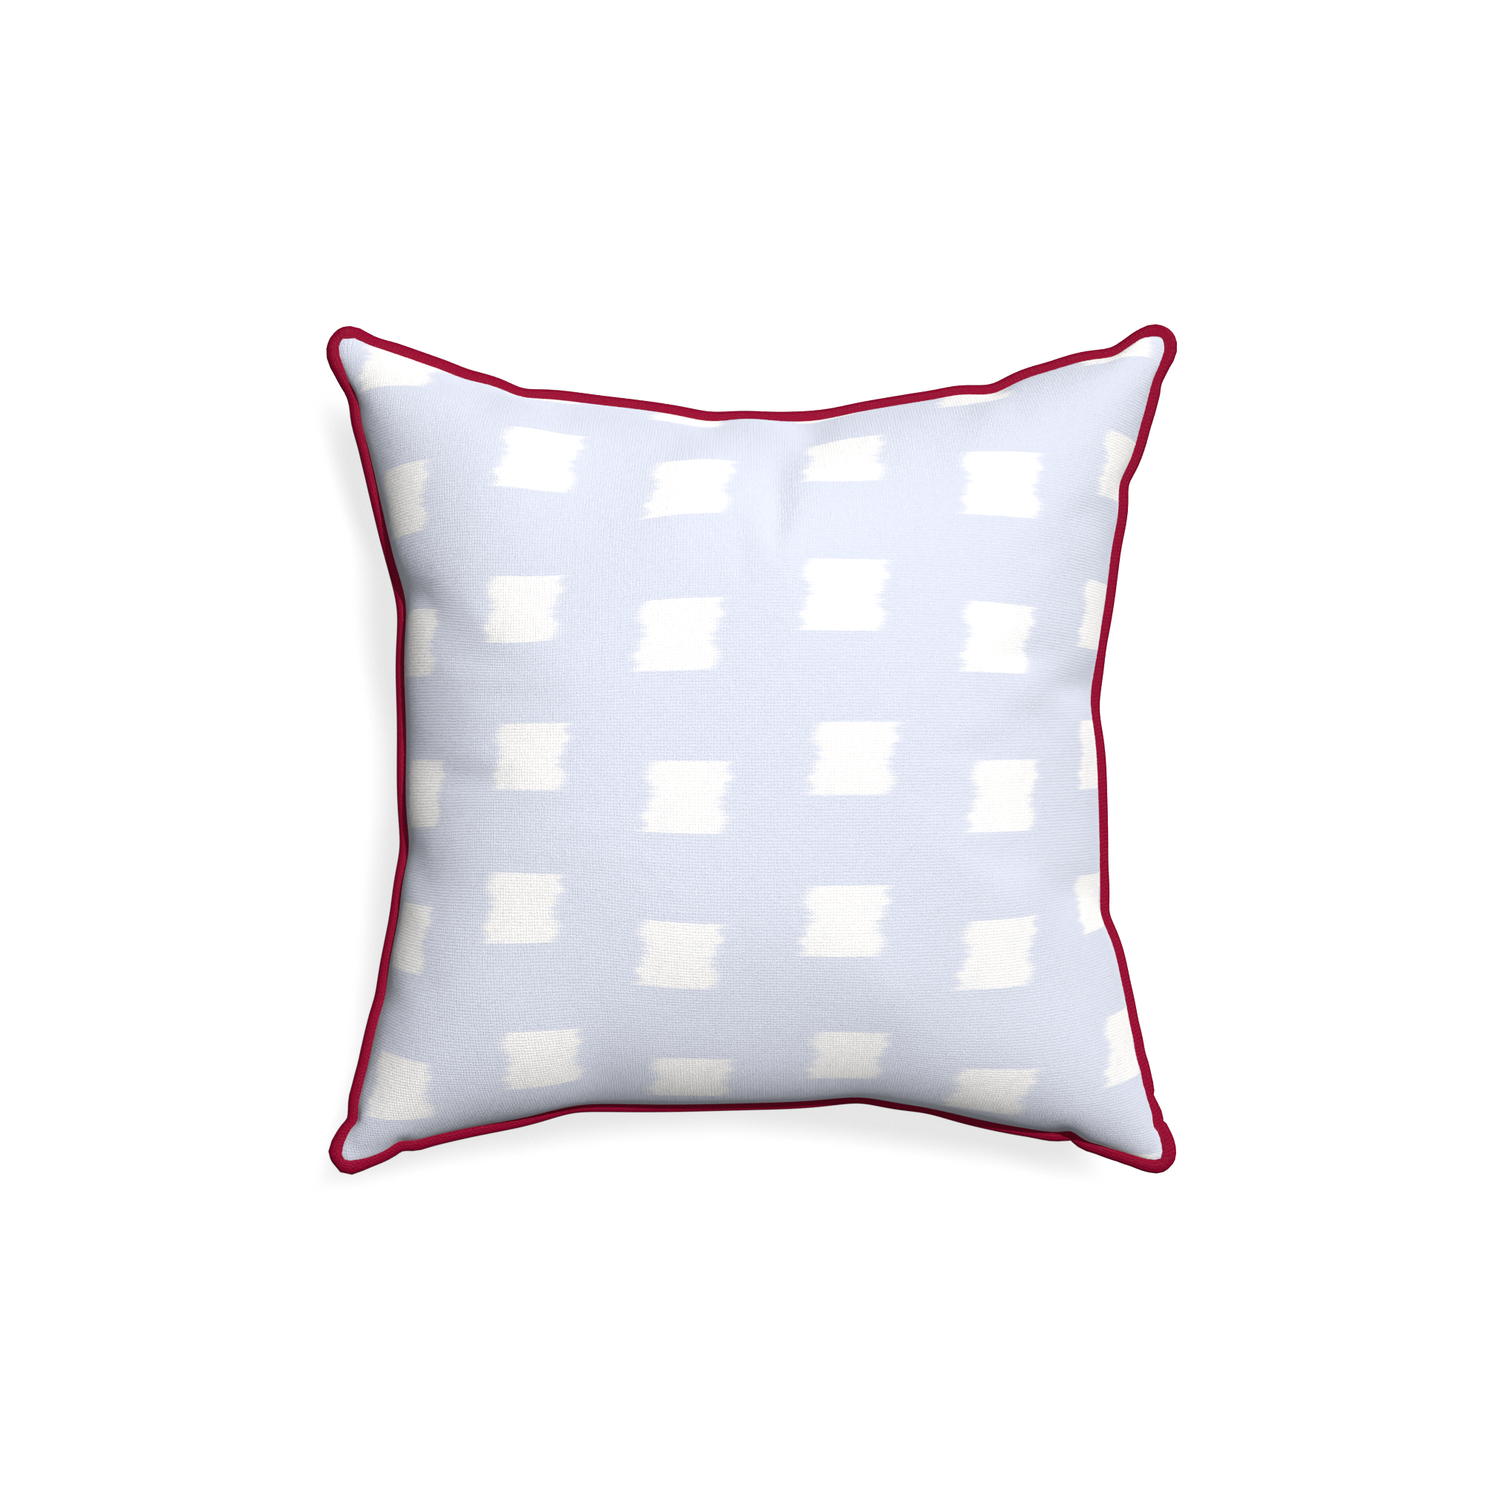 18-square denton custom pillow with raspberry piping on white background